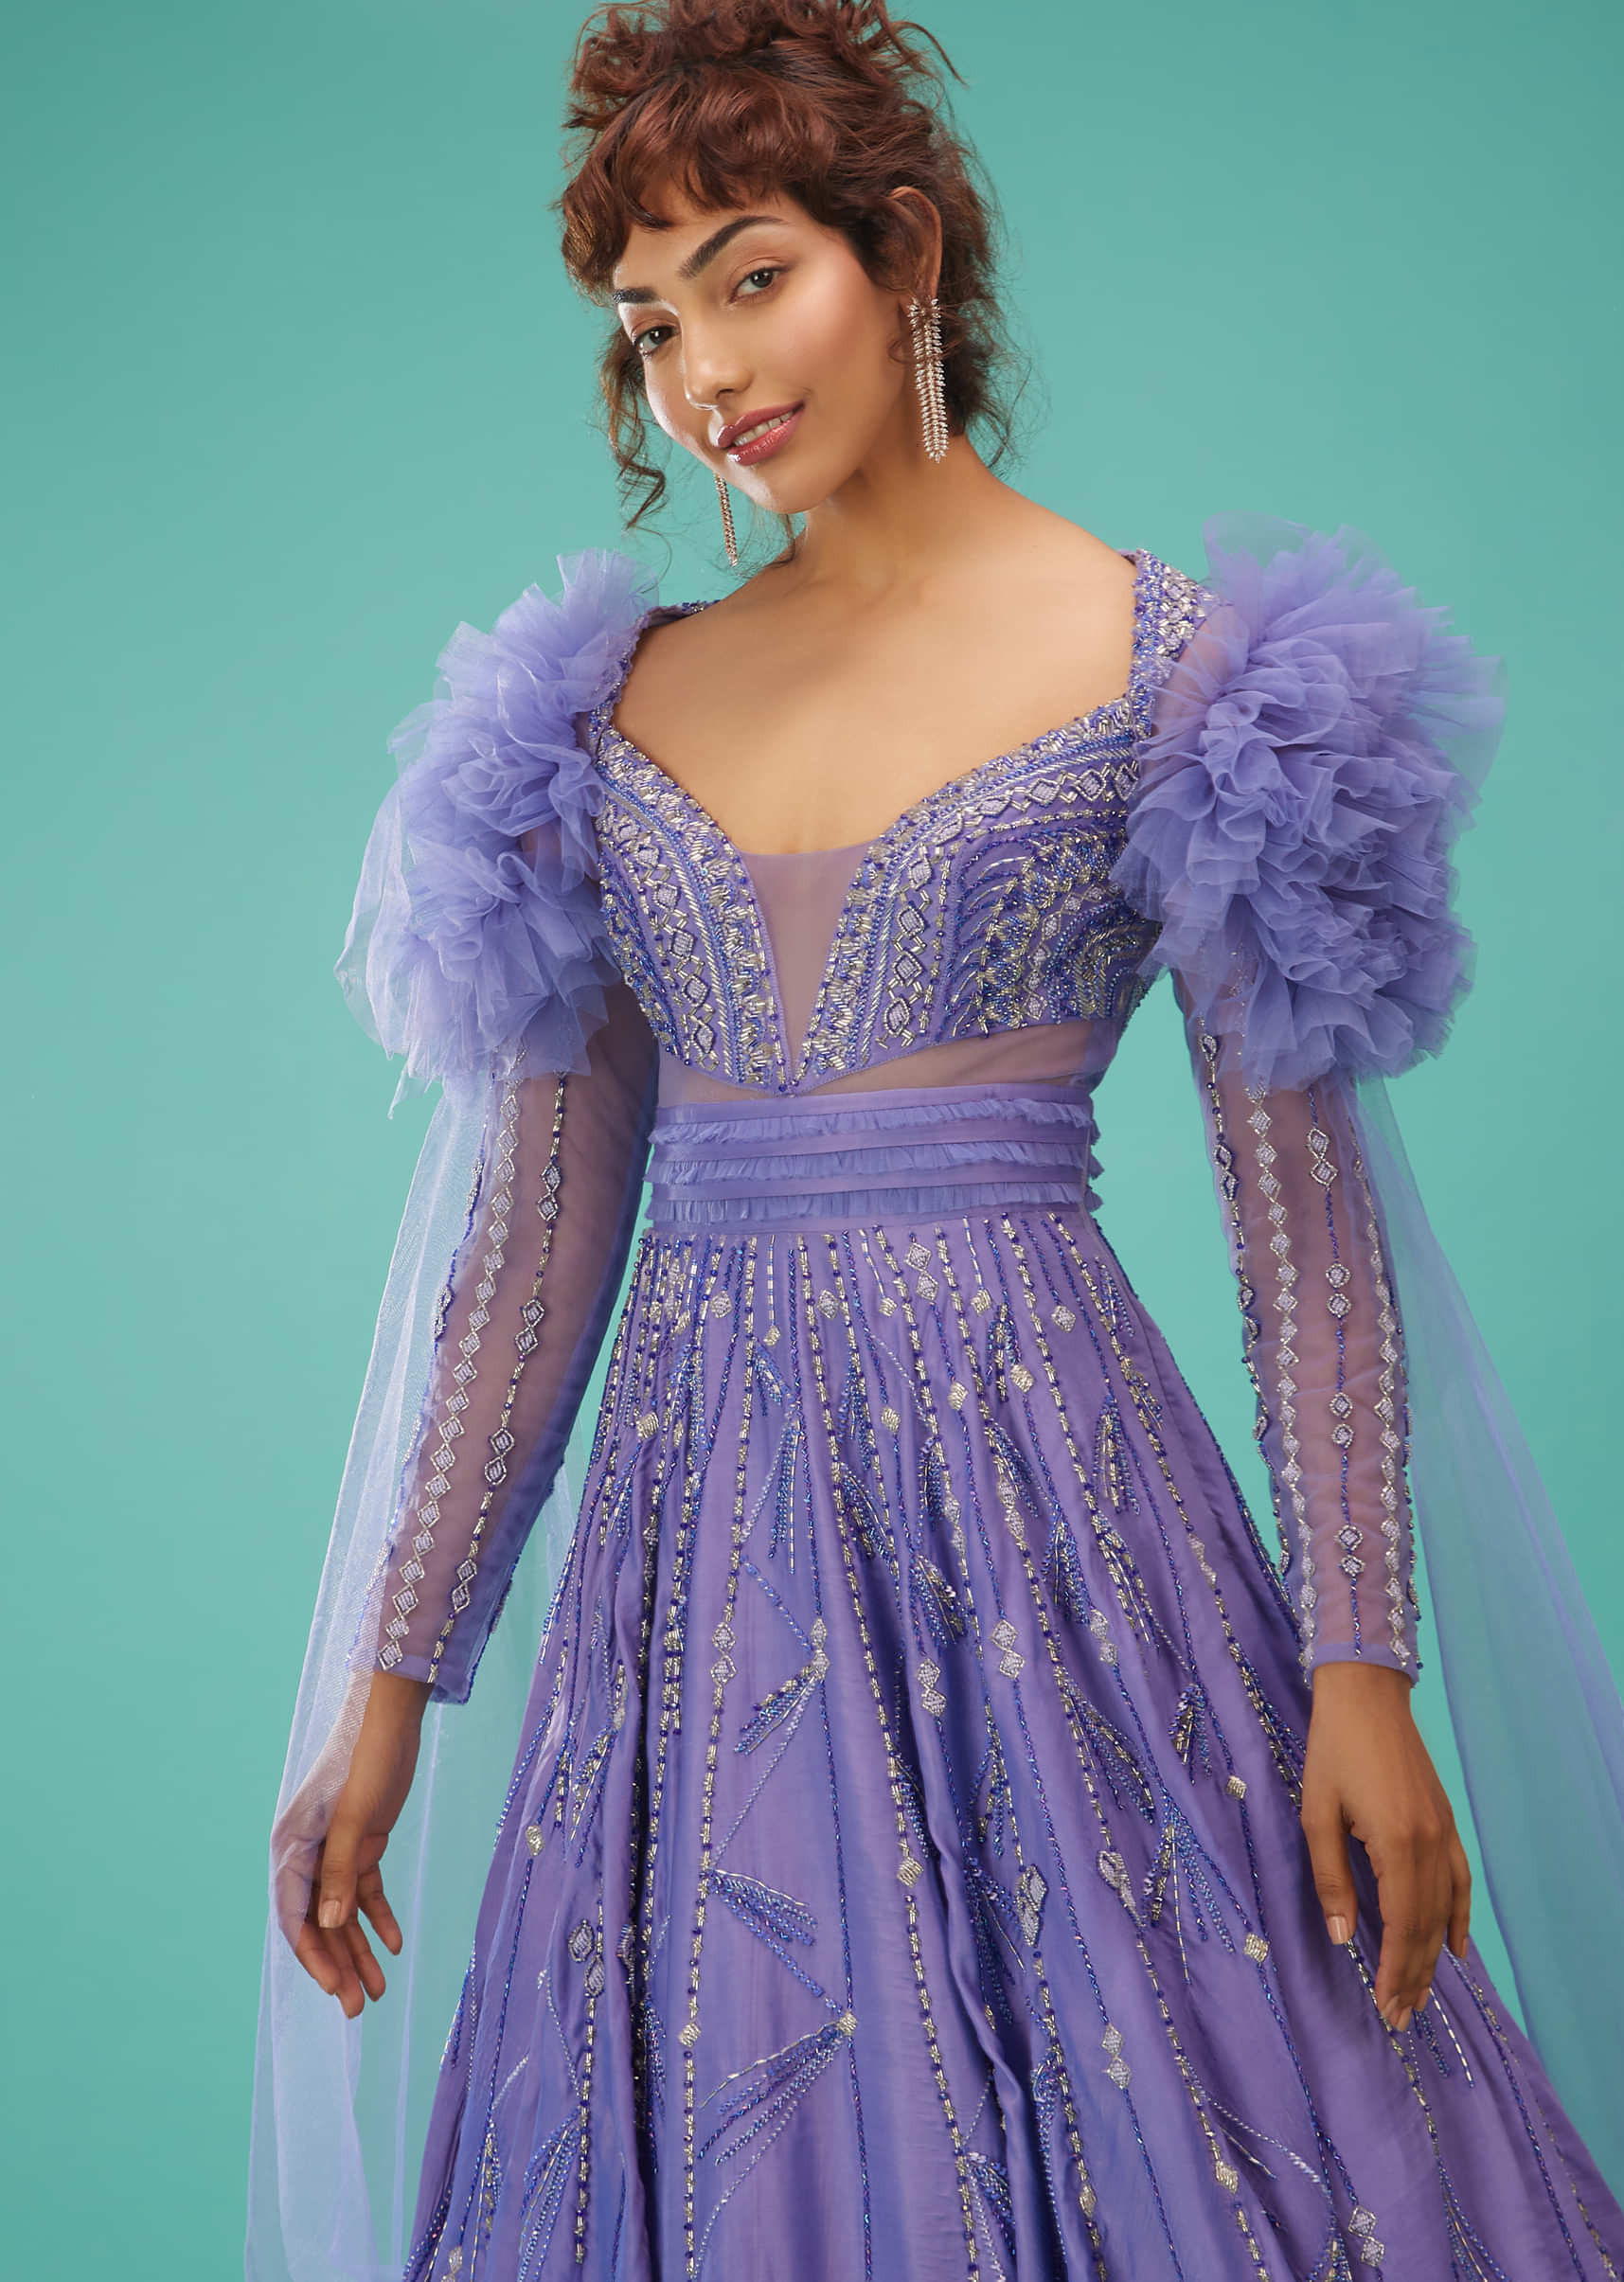 Mauve Purple Ball Gown With Ruffle Frills And Embroidery